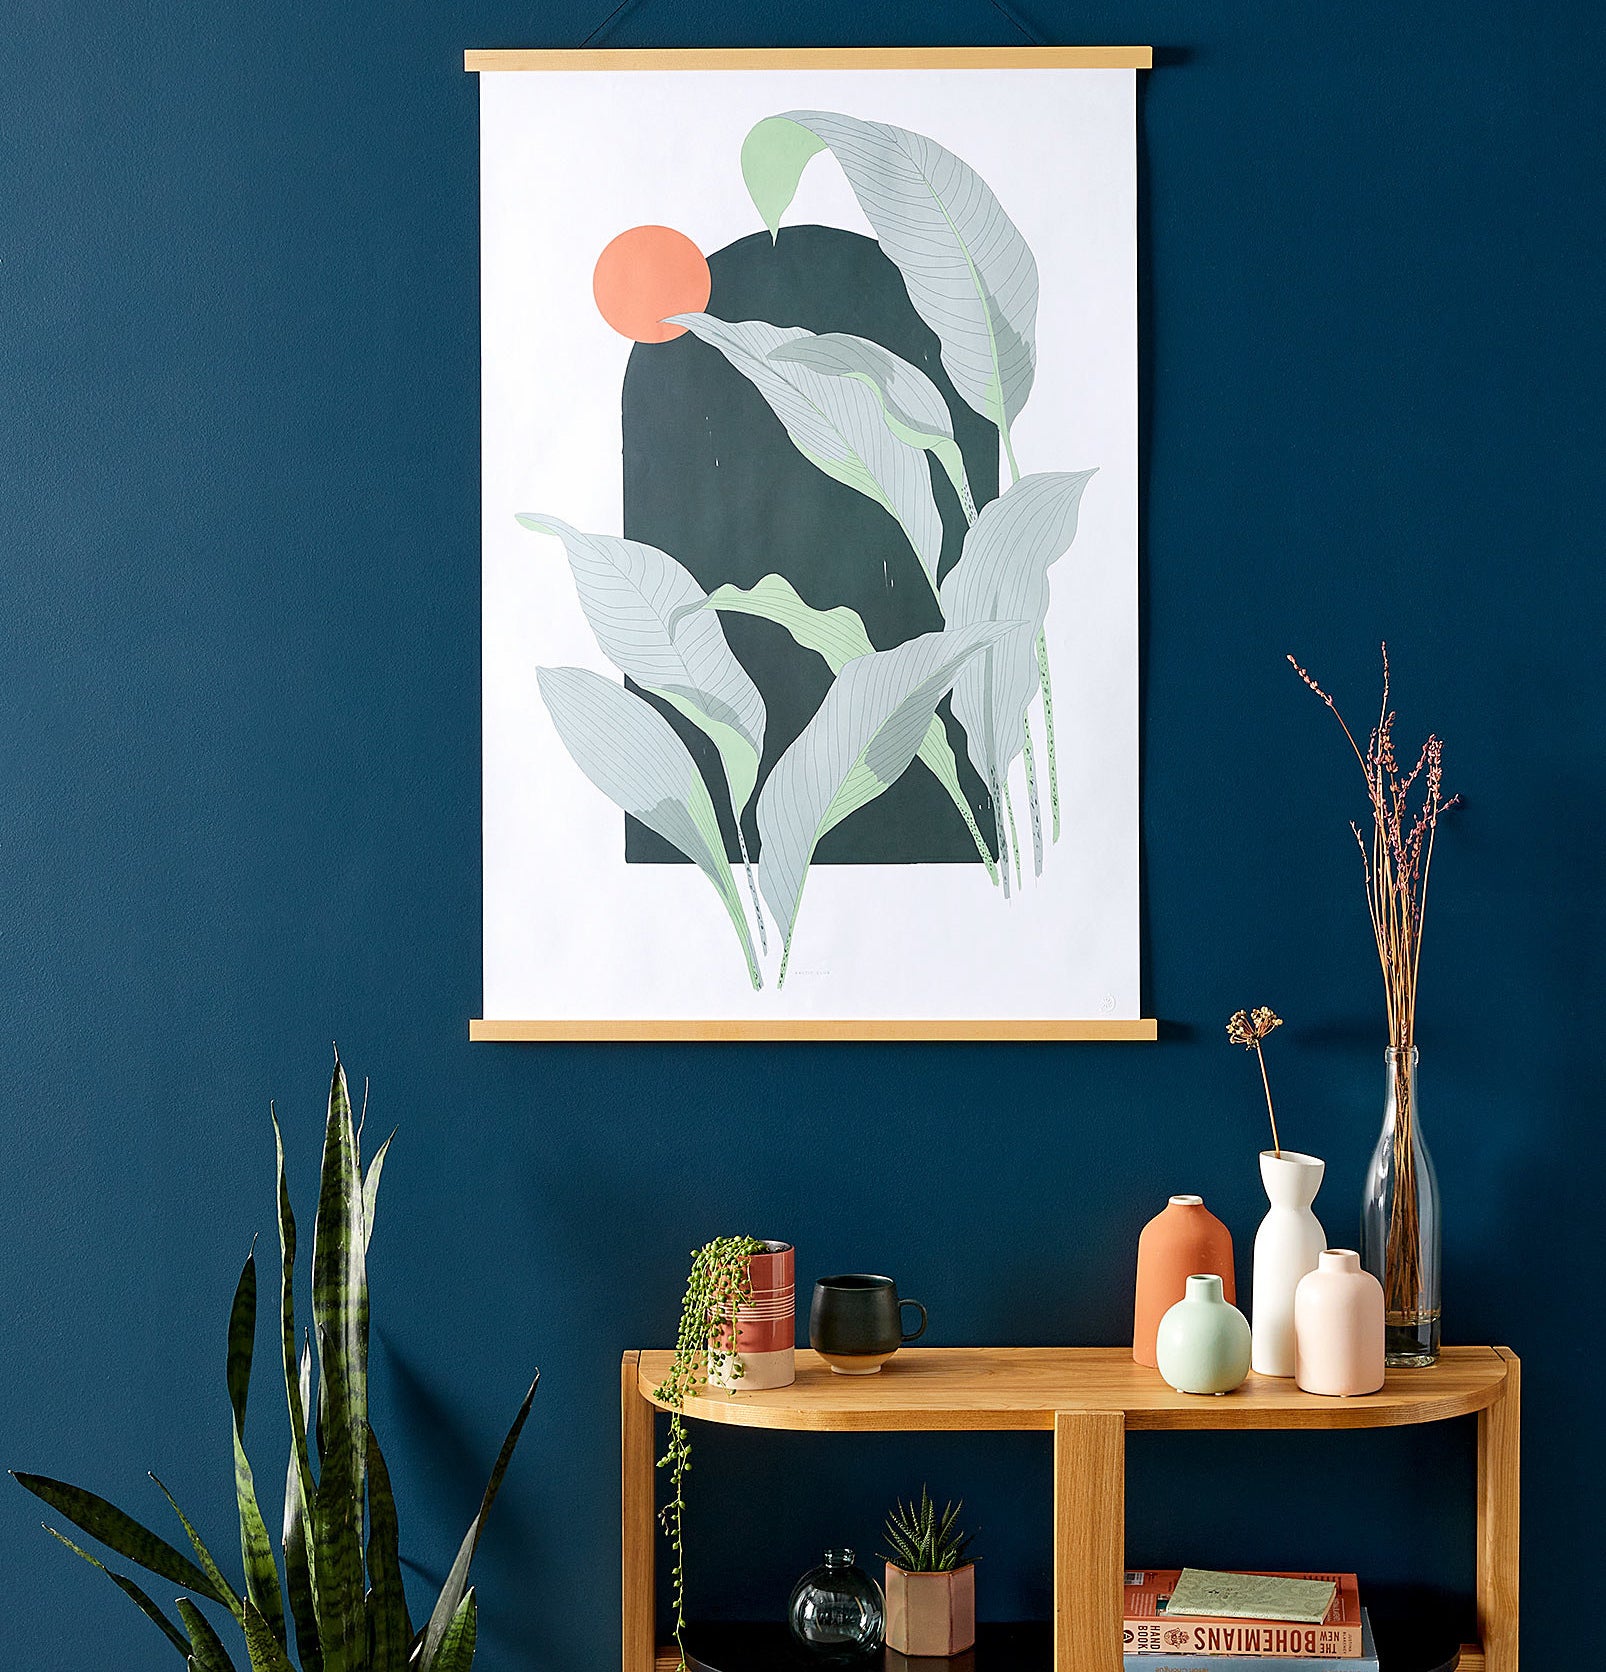 A leafy art print hanging in a frame next to a snake plant and a side table with vases on it